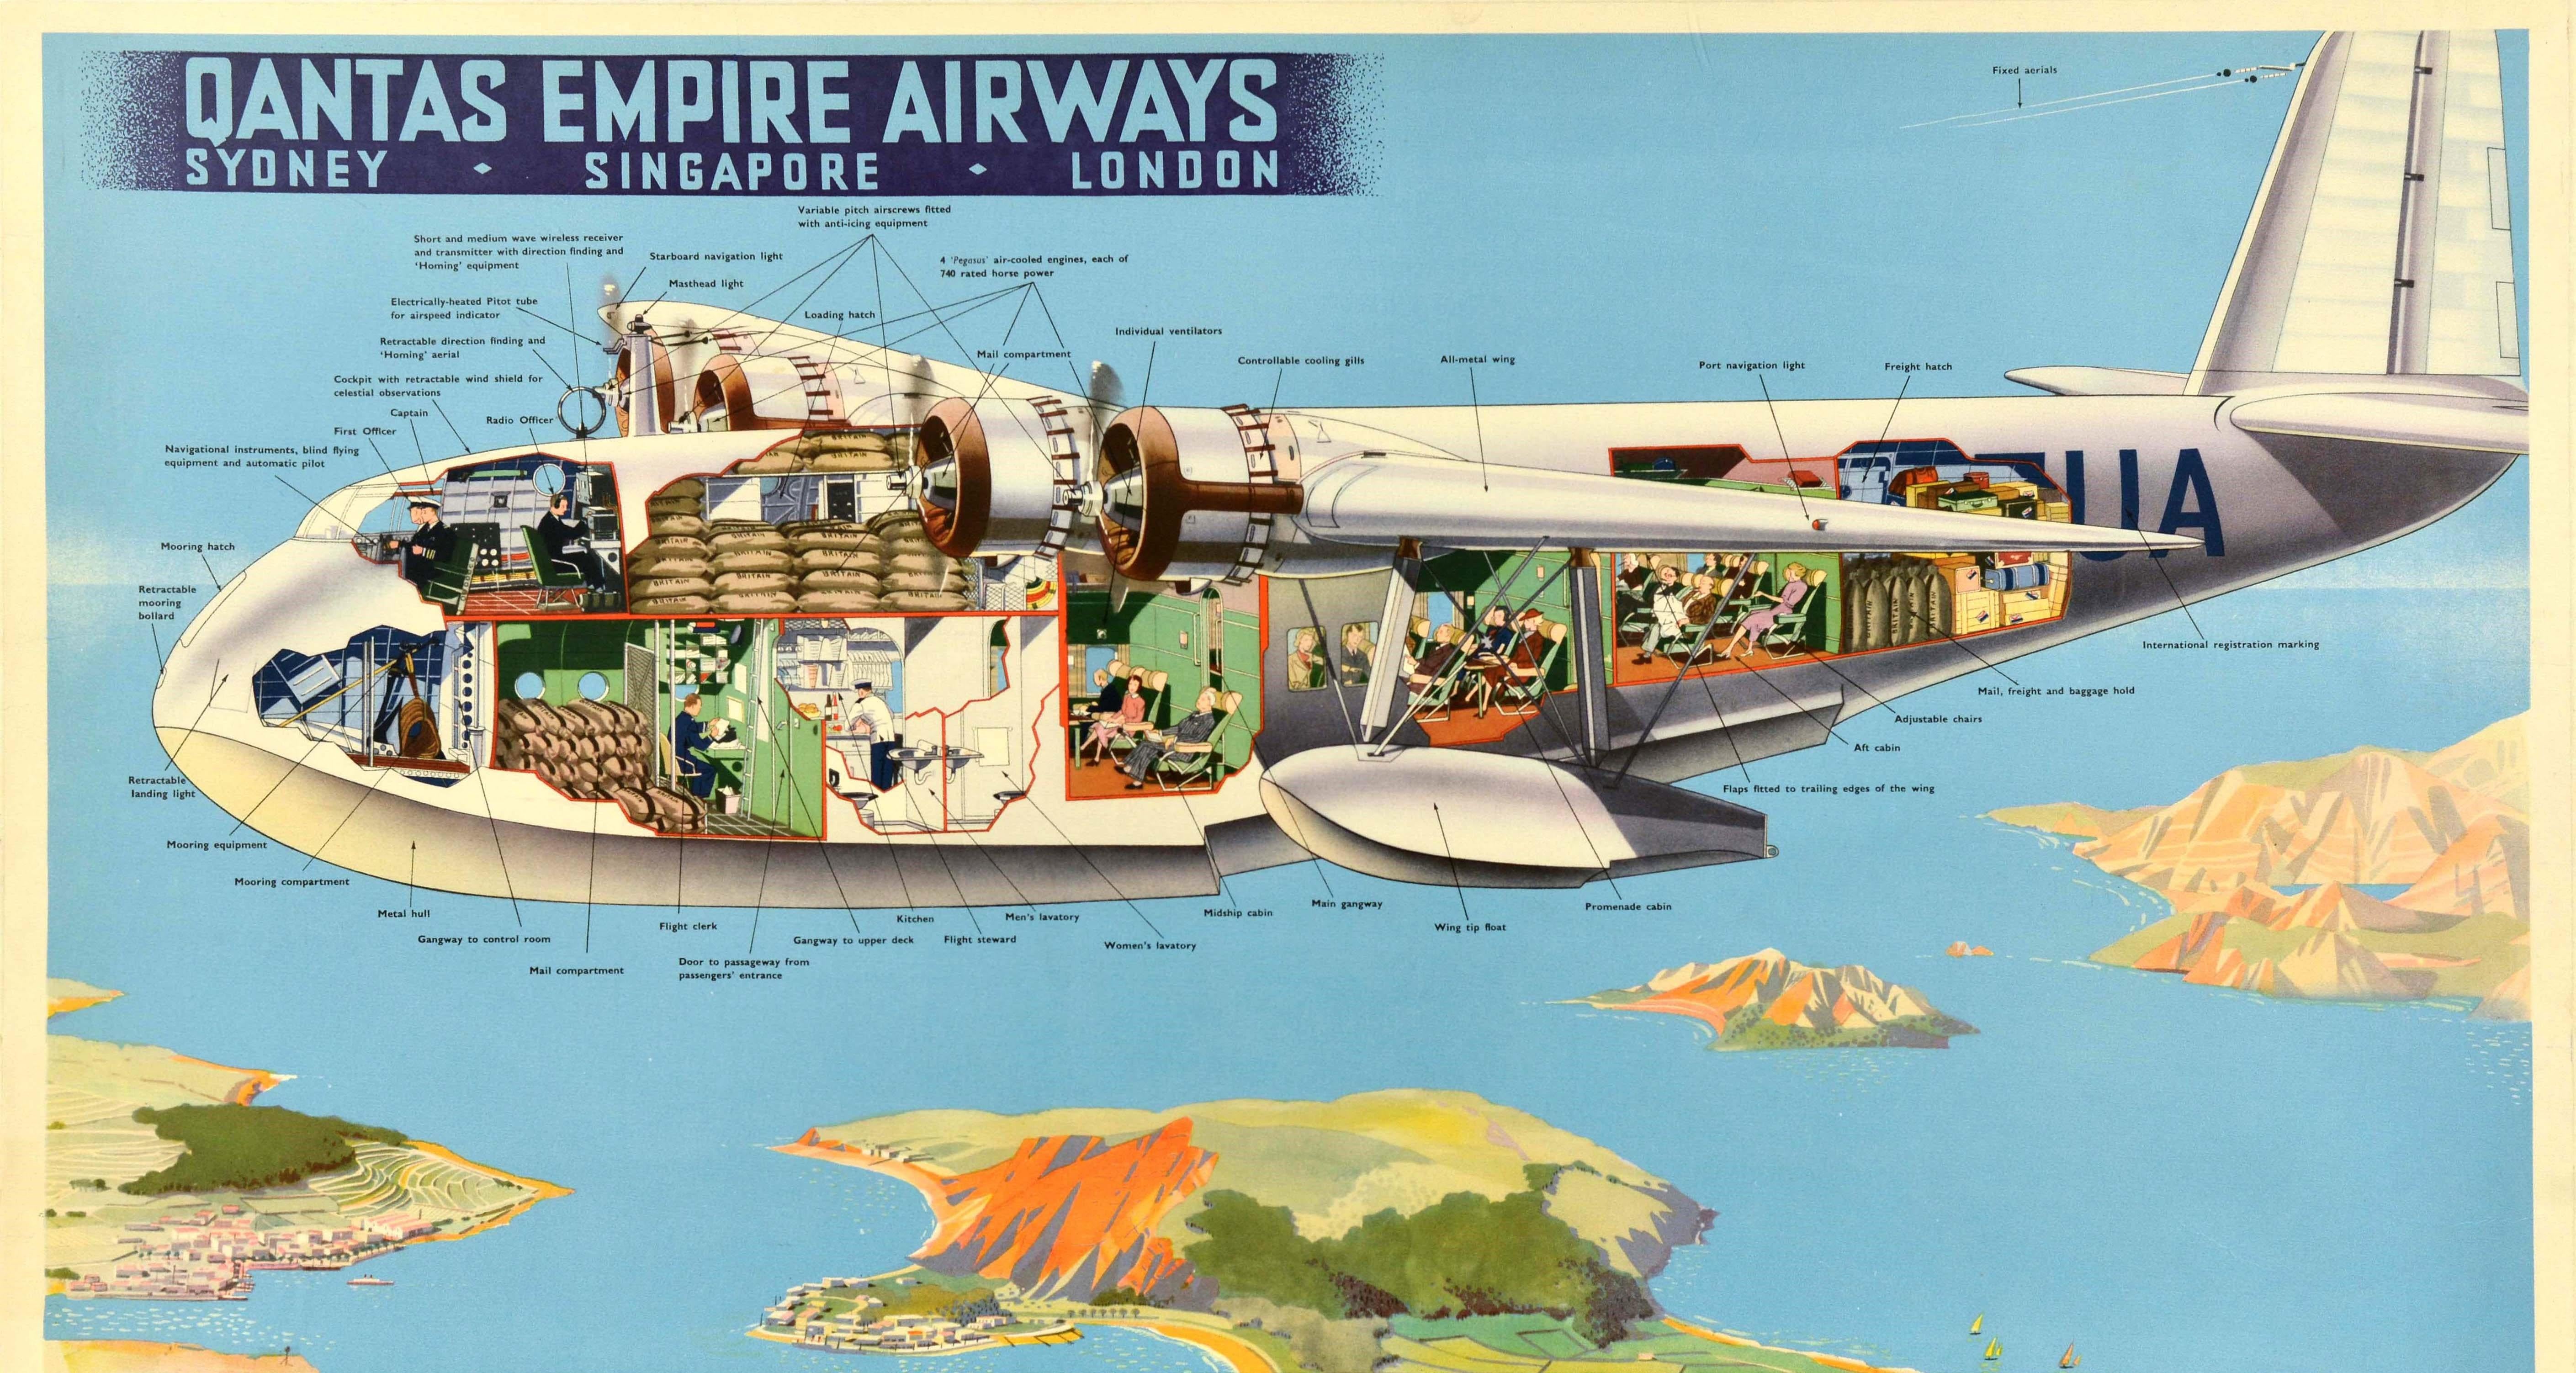 Original vintage travel advertising poster for Qantas Empire Airways Sydney Singapore London An Imperial Flying-Boat Speed with spacious comfort Smoking room Promenade deck 4 engines Imperial Airways Europe Africa India The Far East Australia USA